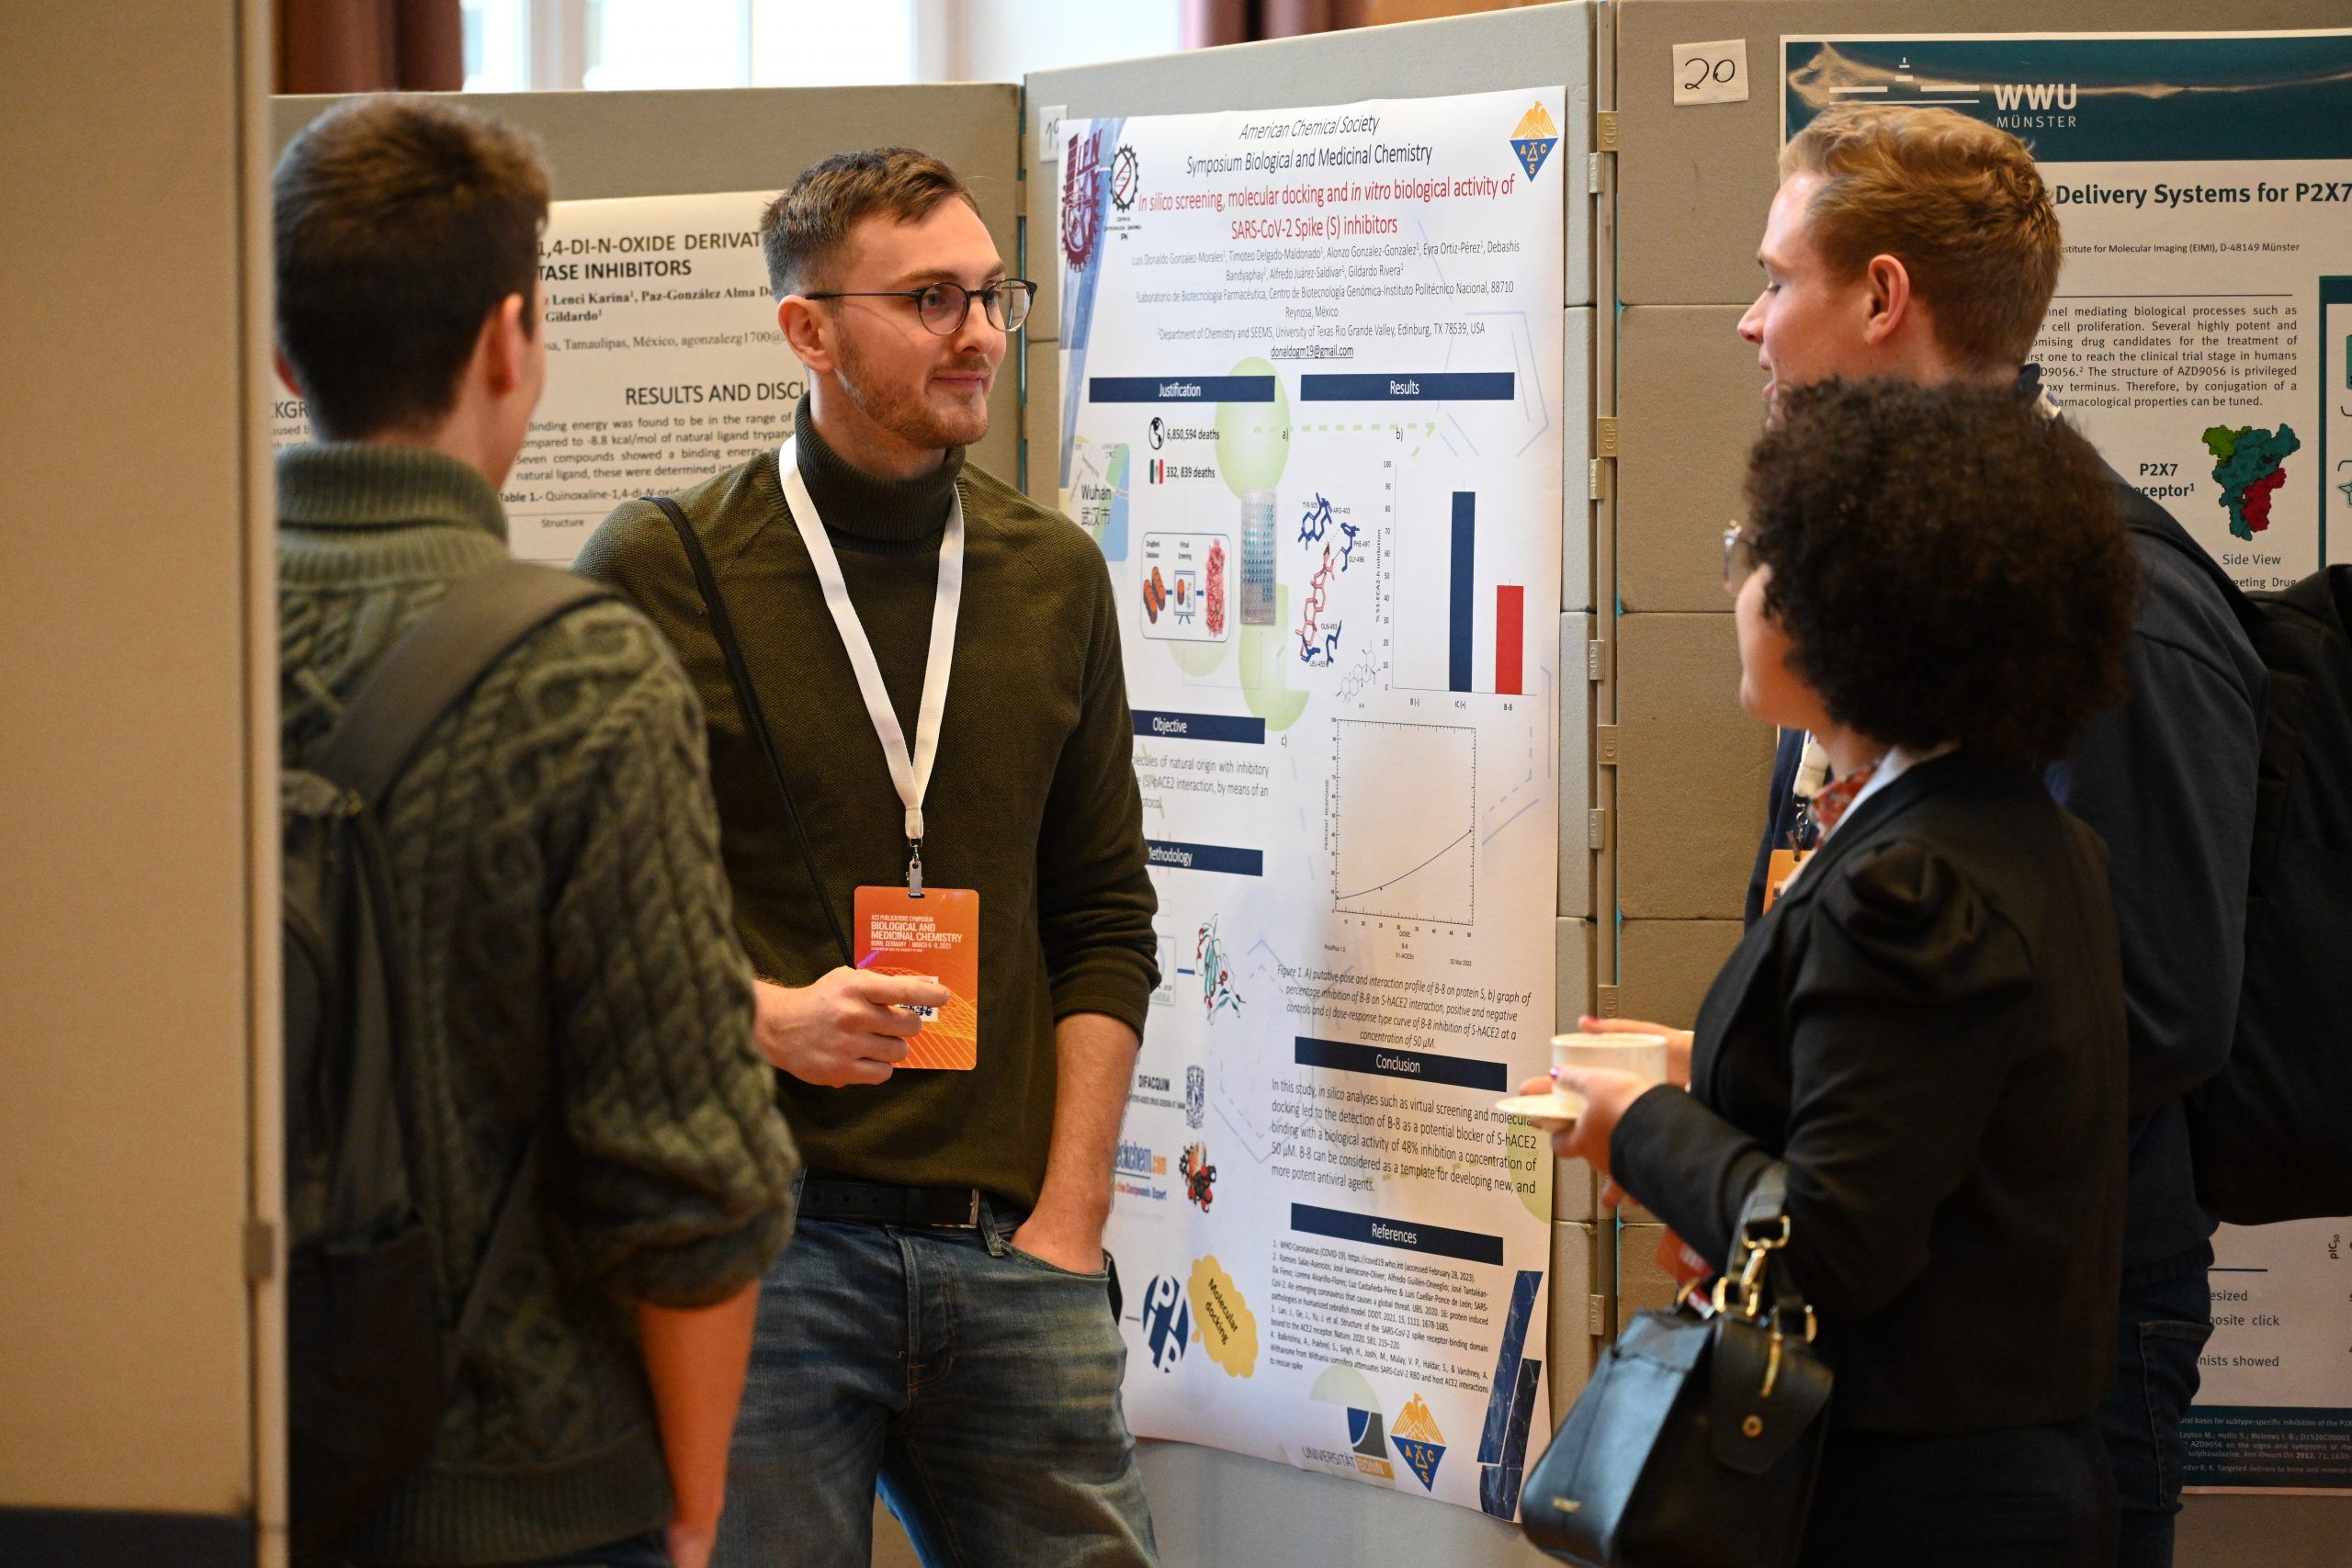 Attendees networking amidst posters at the Bonn Symposium